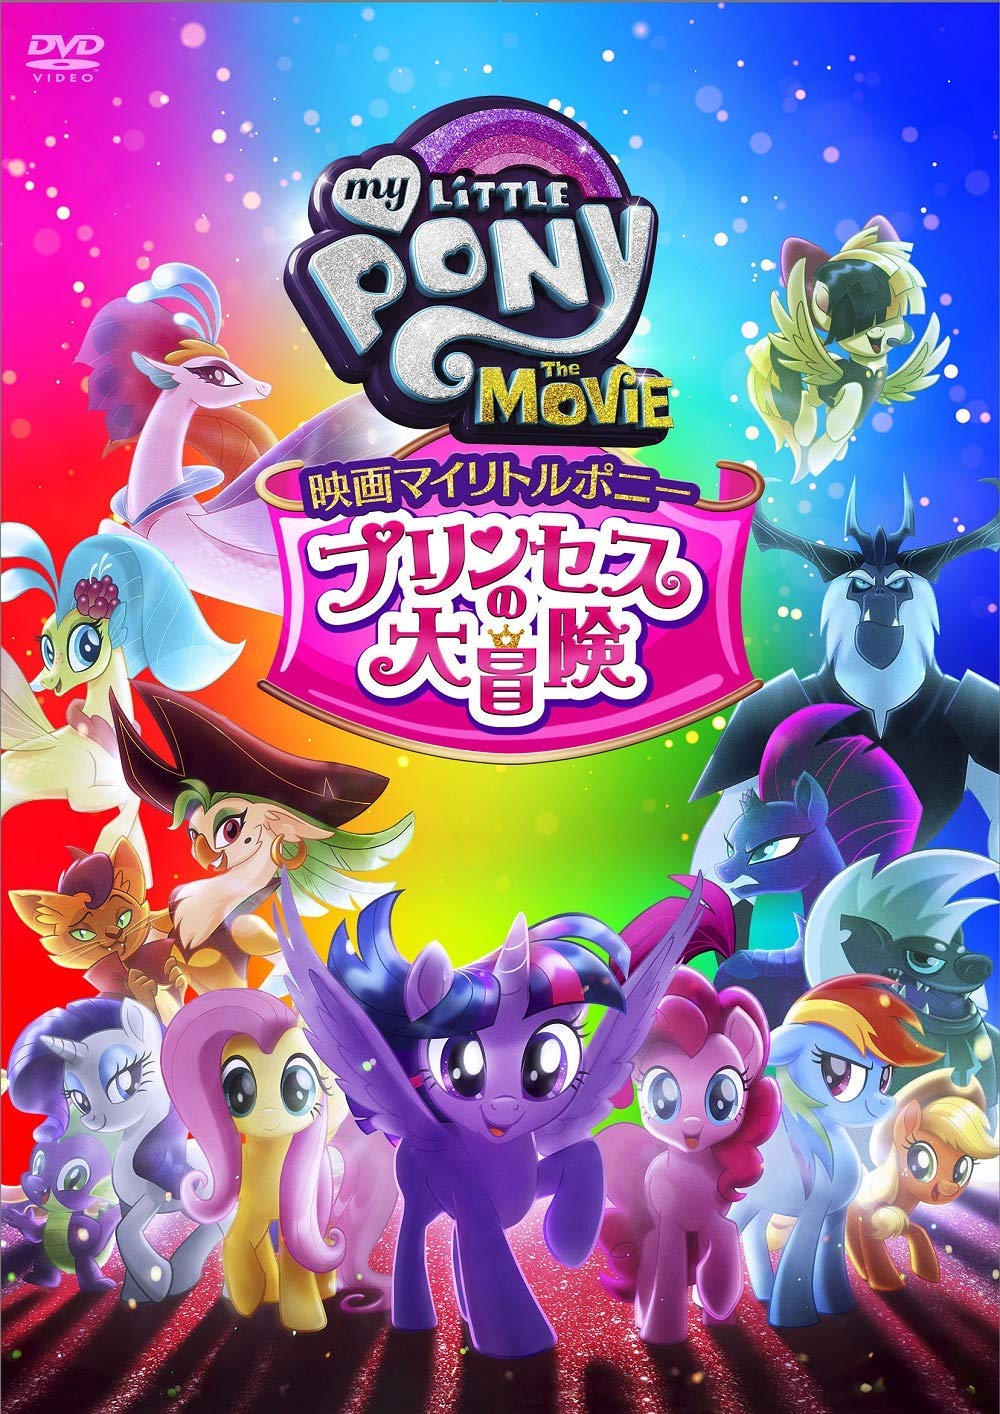 Image - My Little Pony The Movie Japanese DVD Cover.jpg